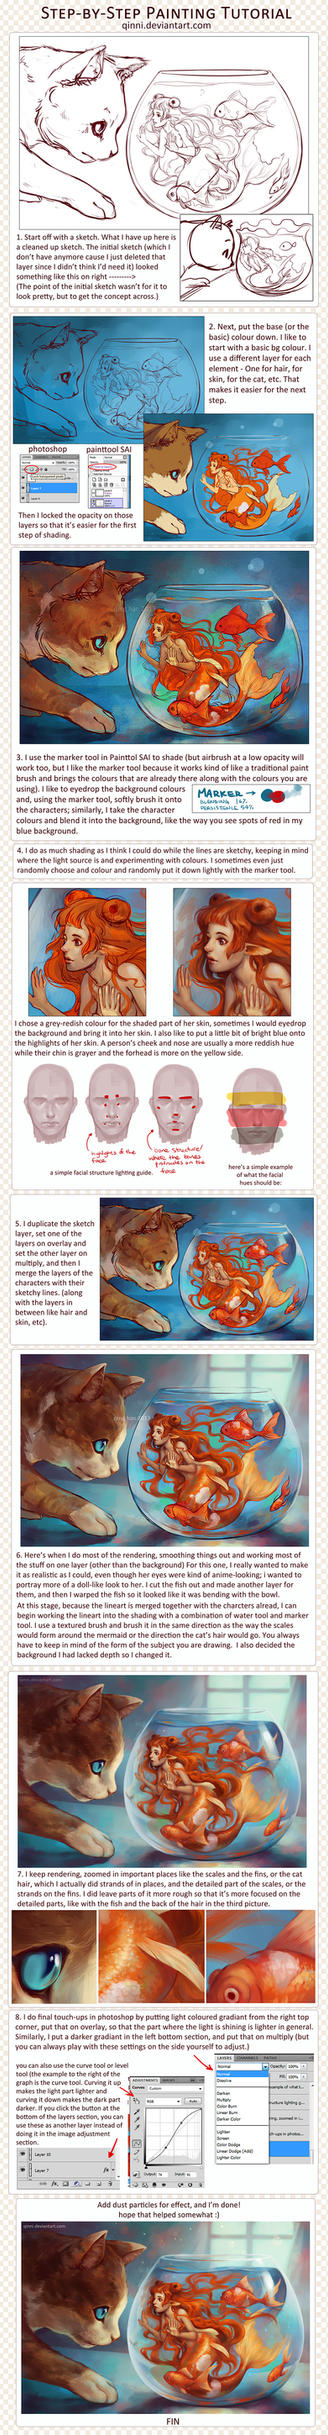 Step-by-Step Digital Painting Tutorial by Qinni on DeviantArt